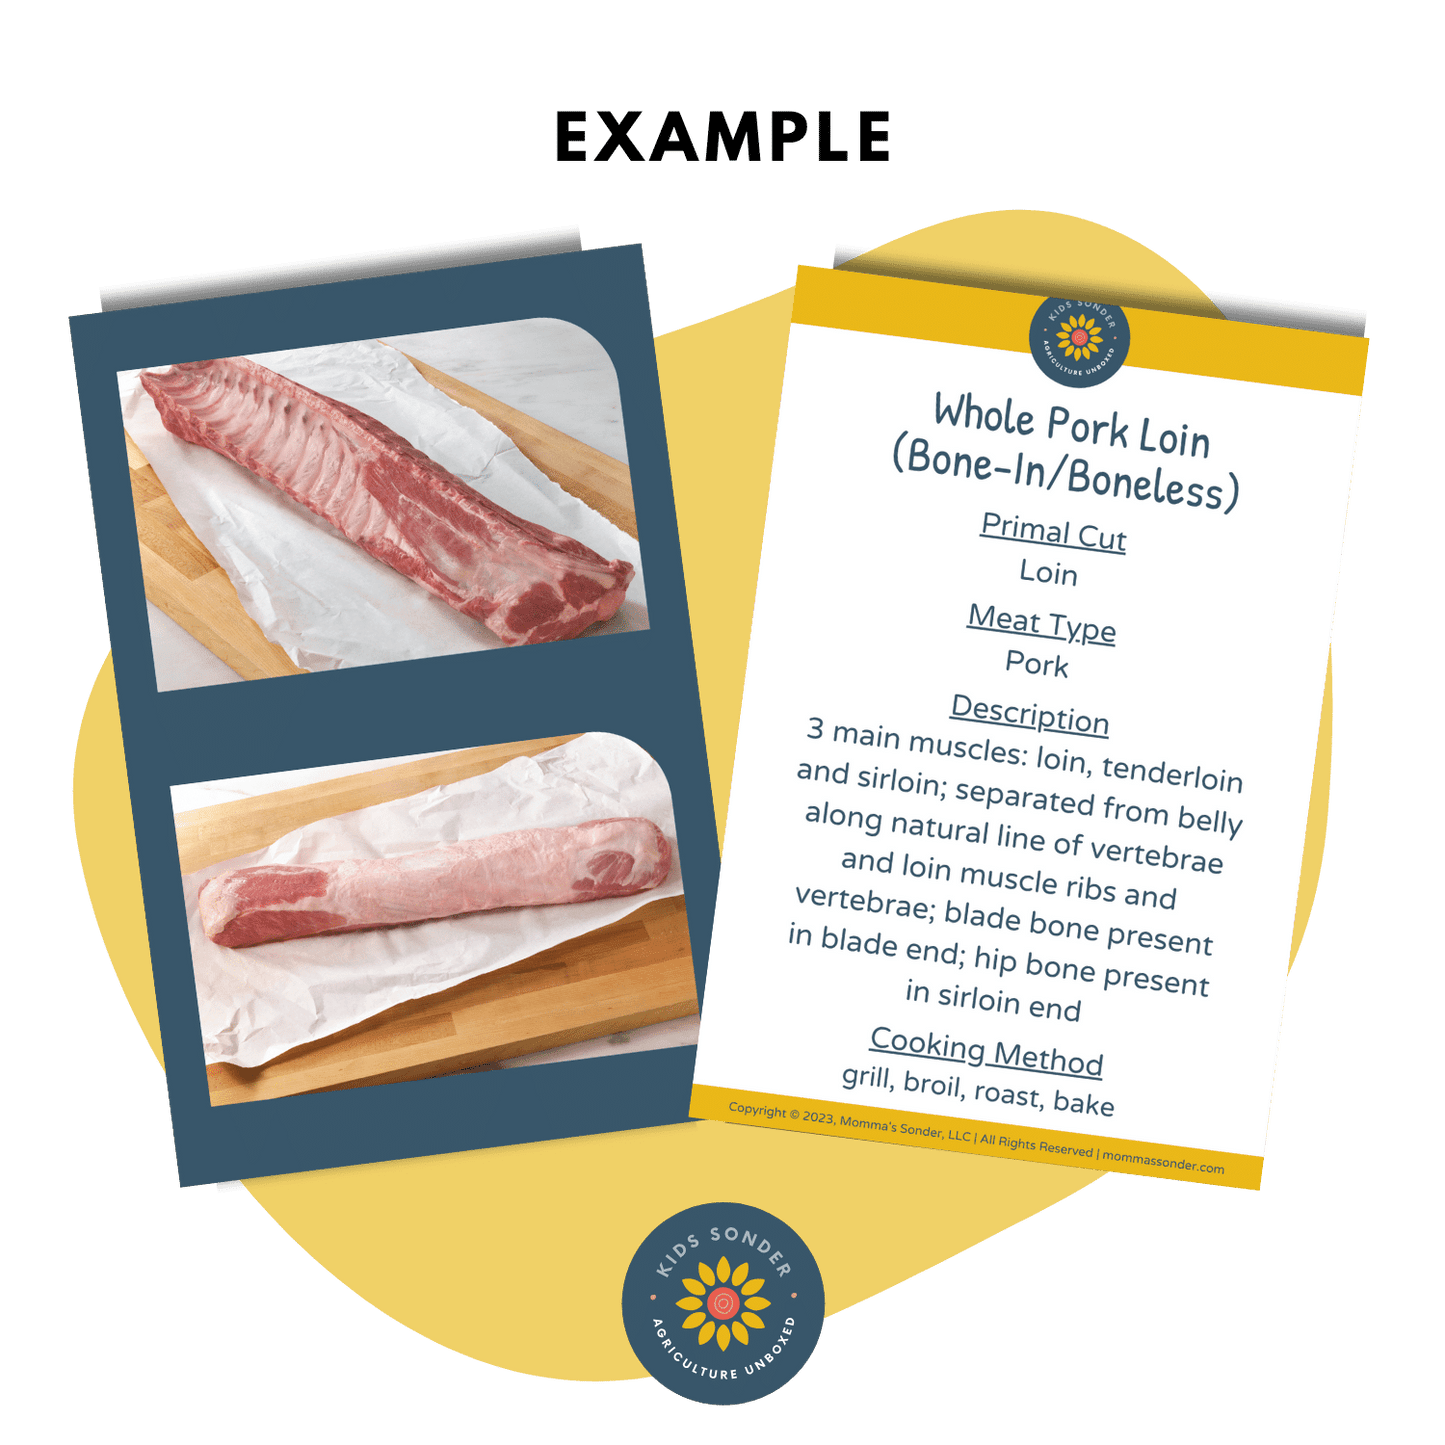 Meat Science: Wholesale/Retail Pork Meat Cut Identification Flashcards